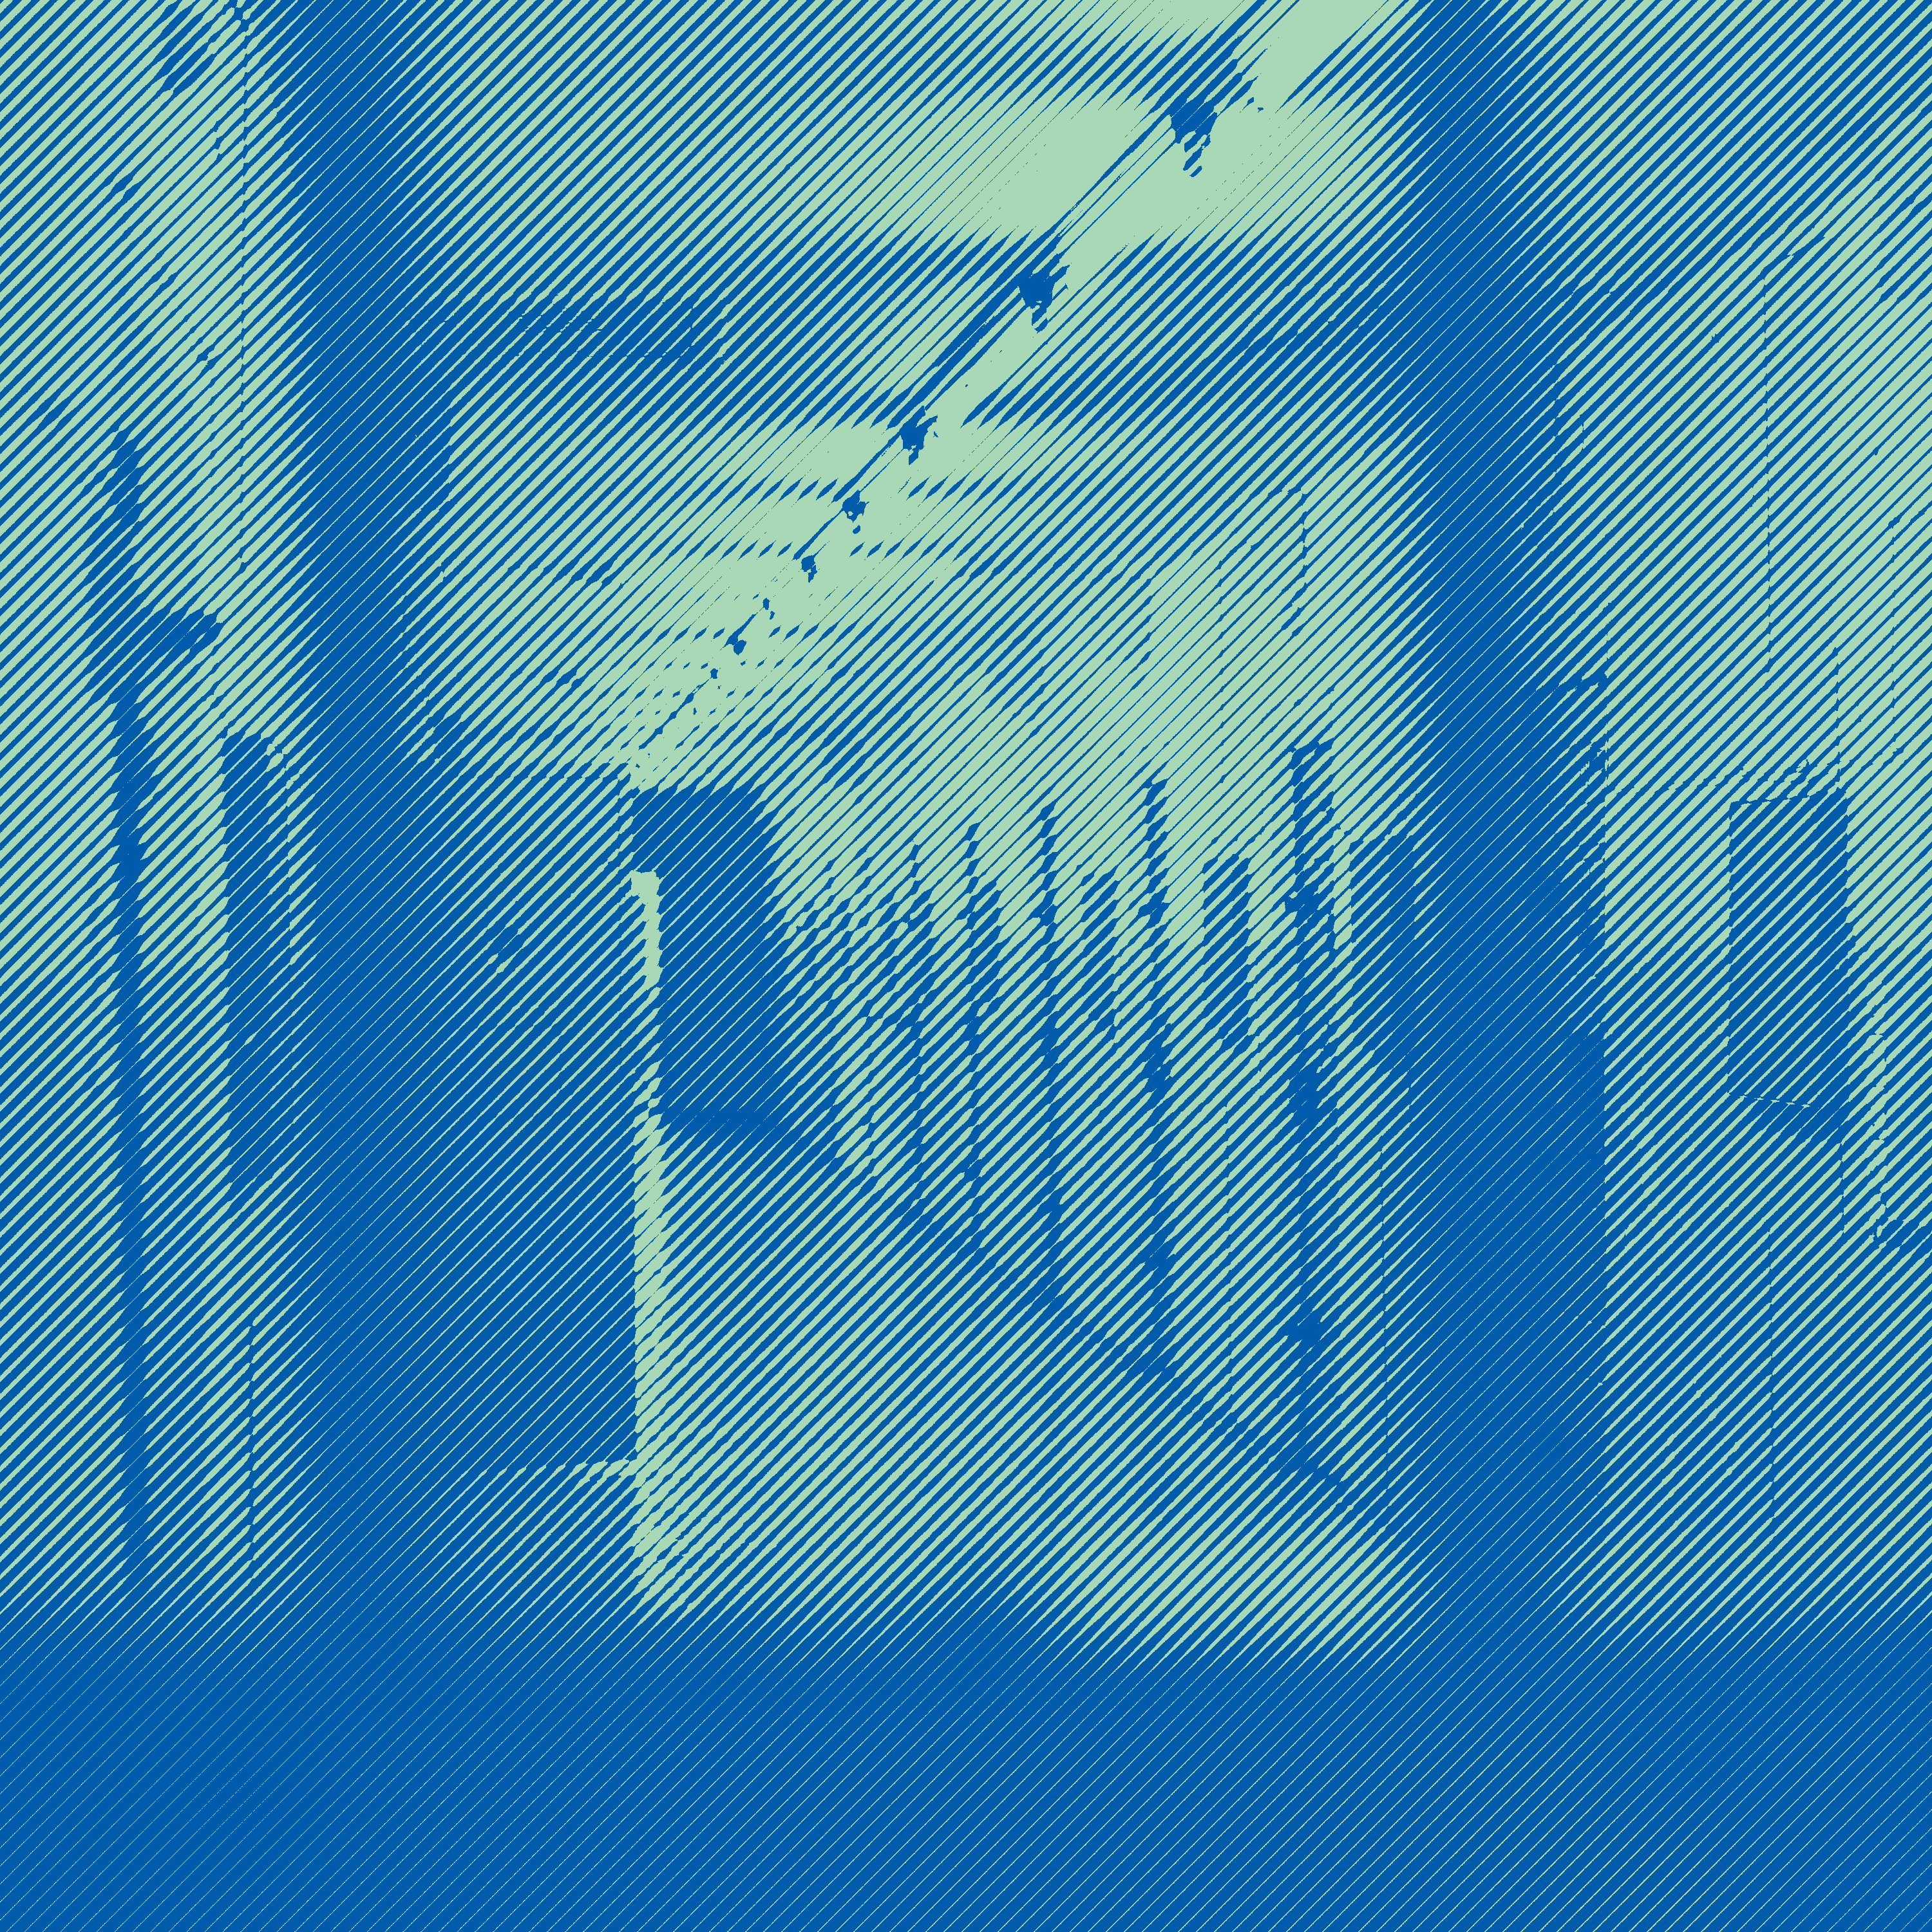 Photo of inside of jail with light blue and green duotone treatment.